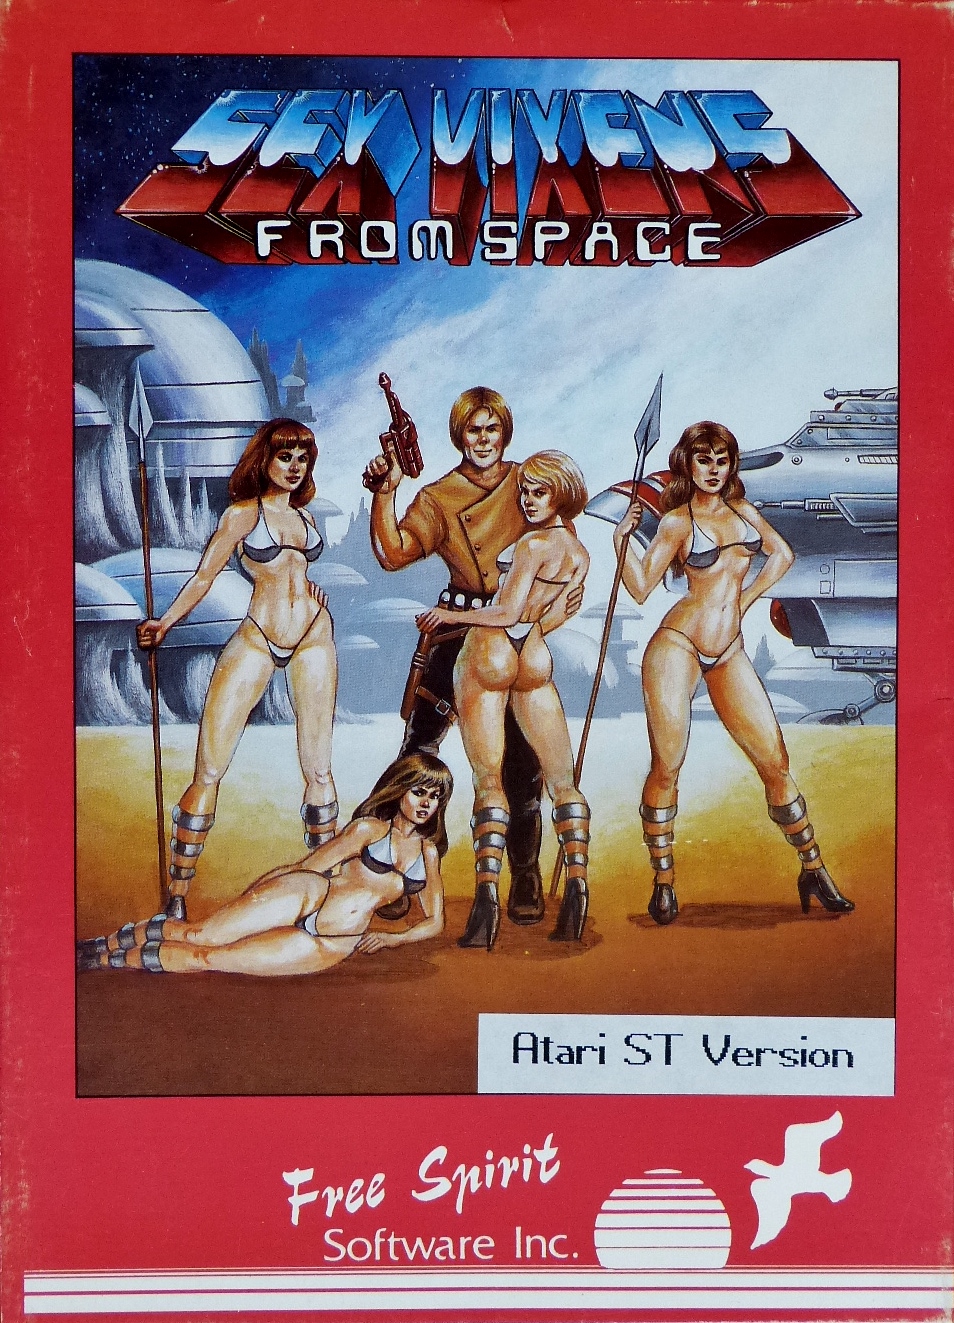 Computer Game Museum Display Case - Sex Vixens from Space.